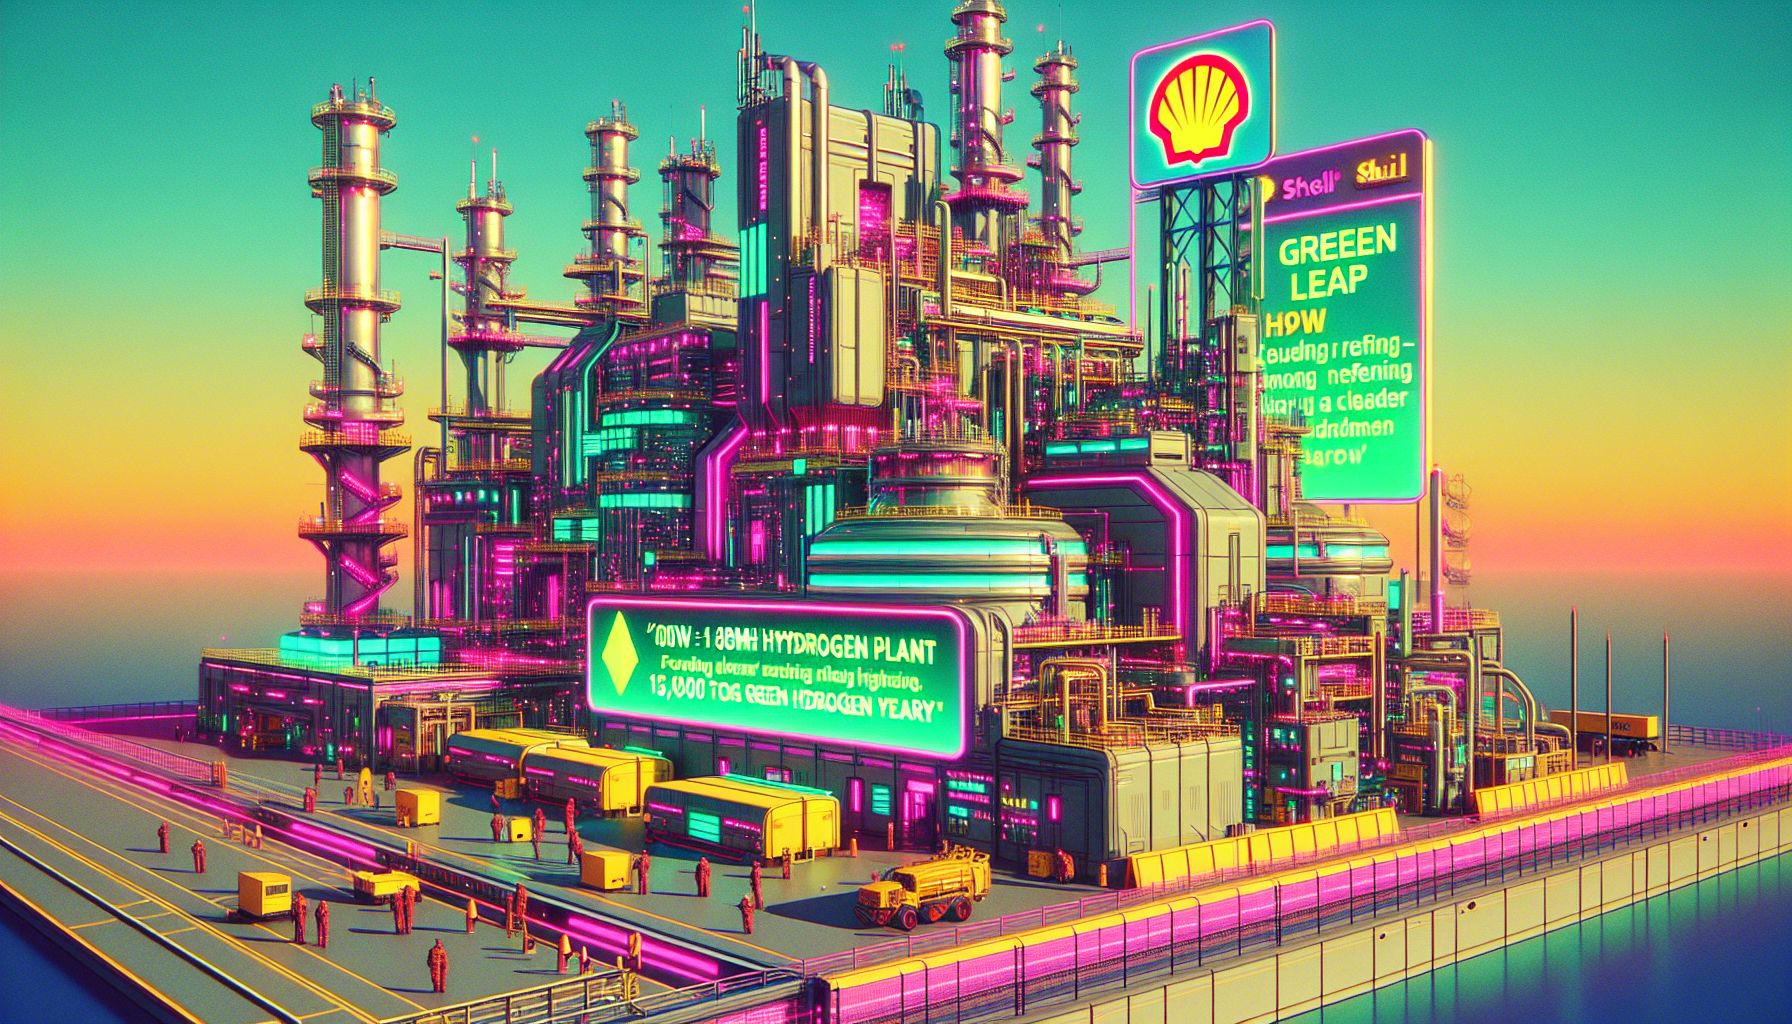 Shell's Green Leap: 100MW Hydrogen Plant to Fuel Cleaner Refining